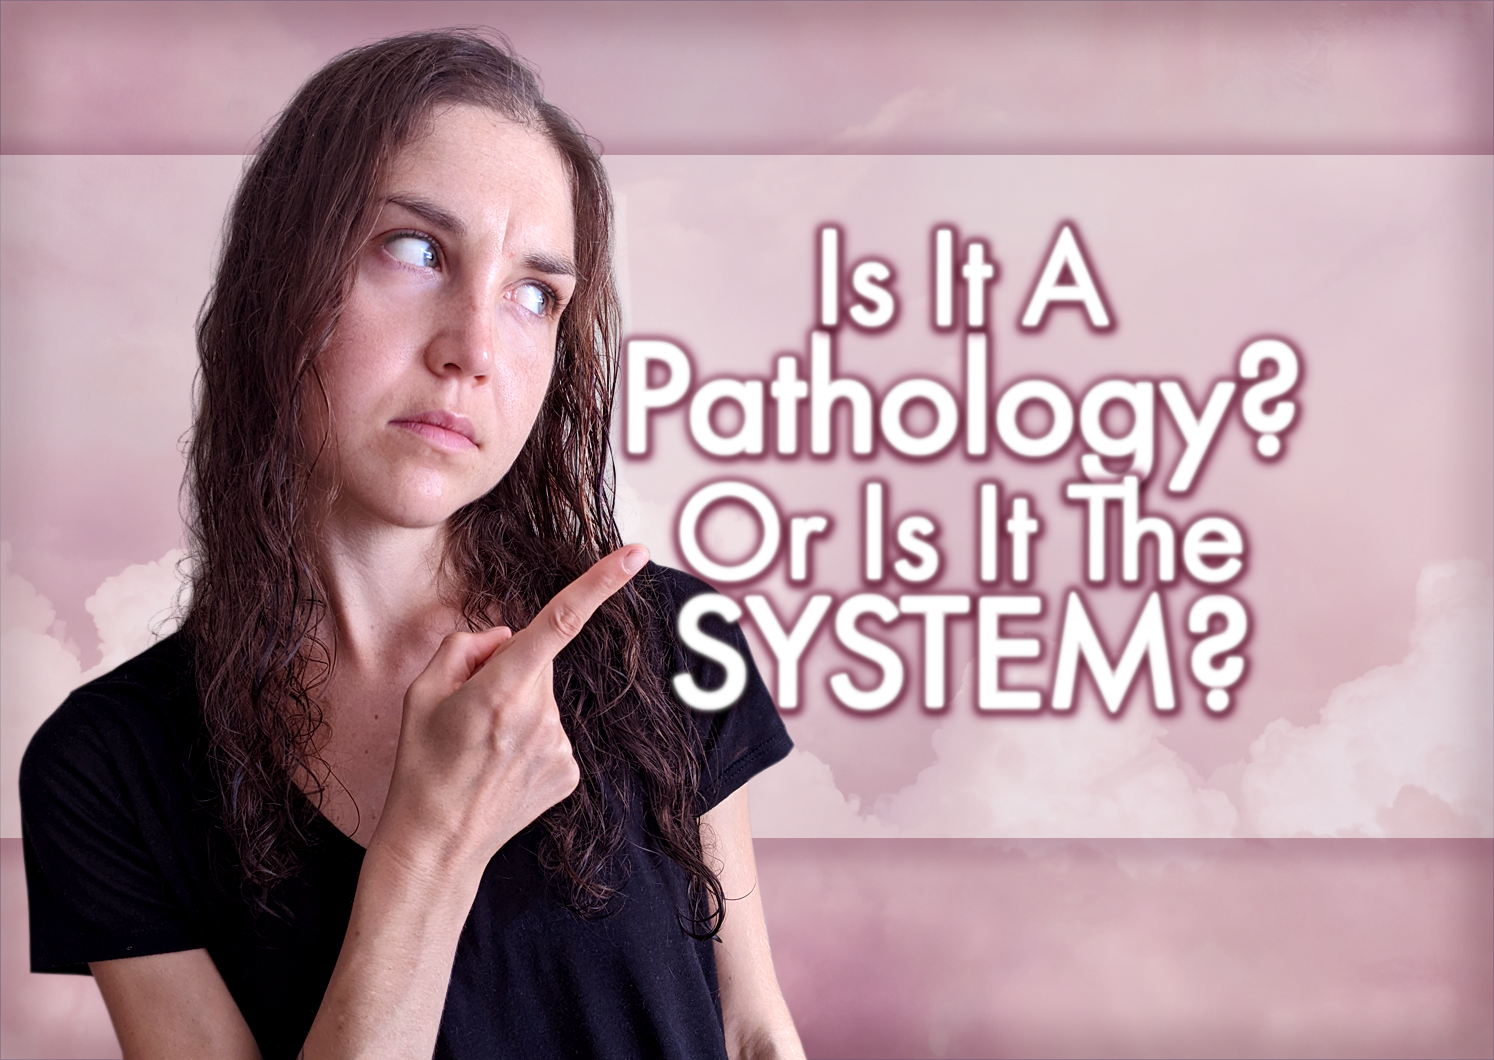 Is It A Pathology? Or Is It The SYSTEM?